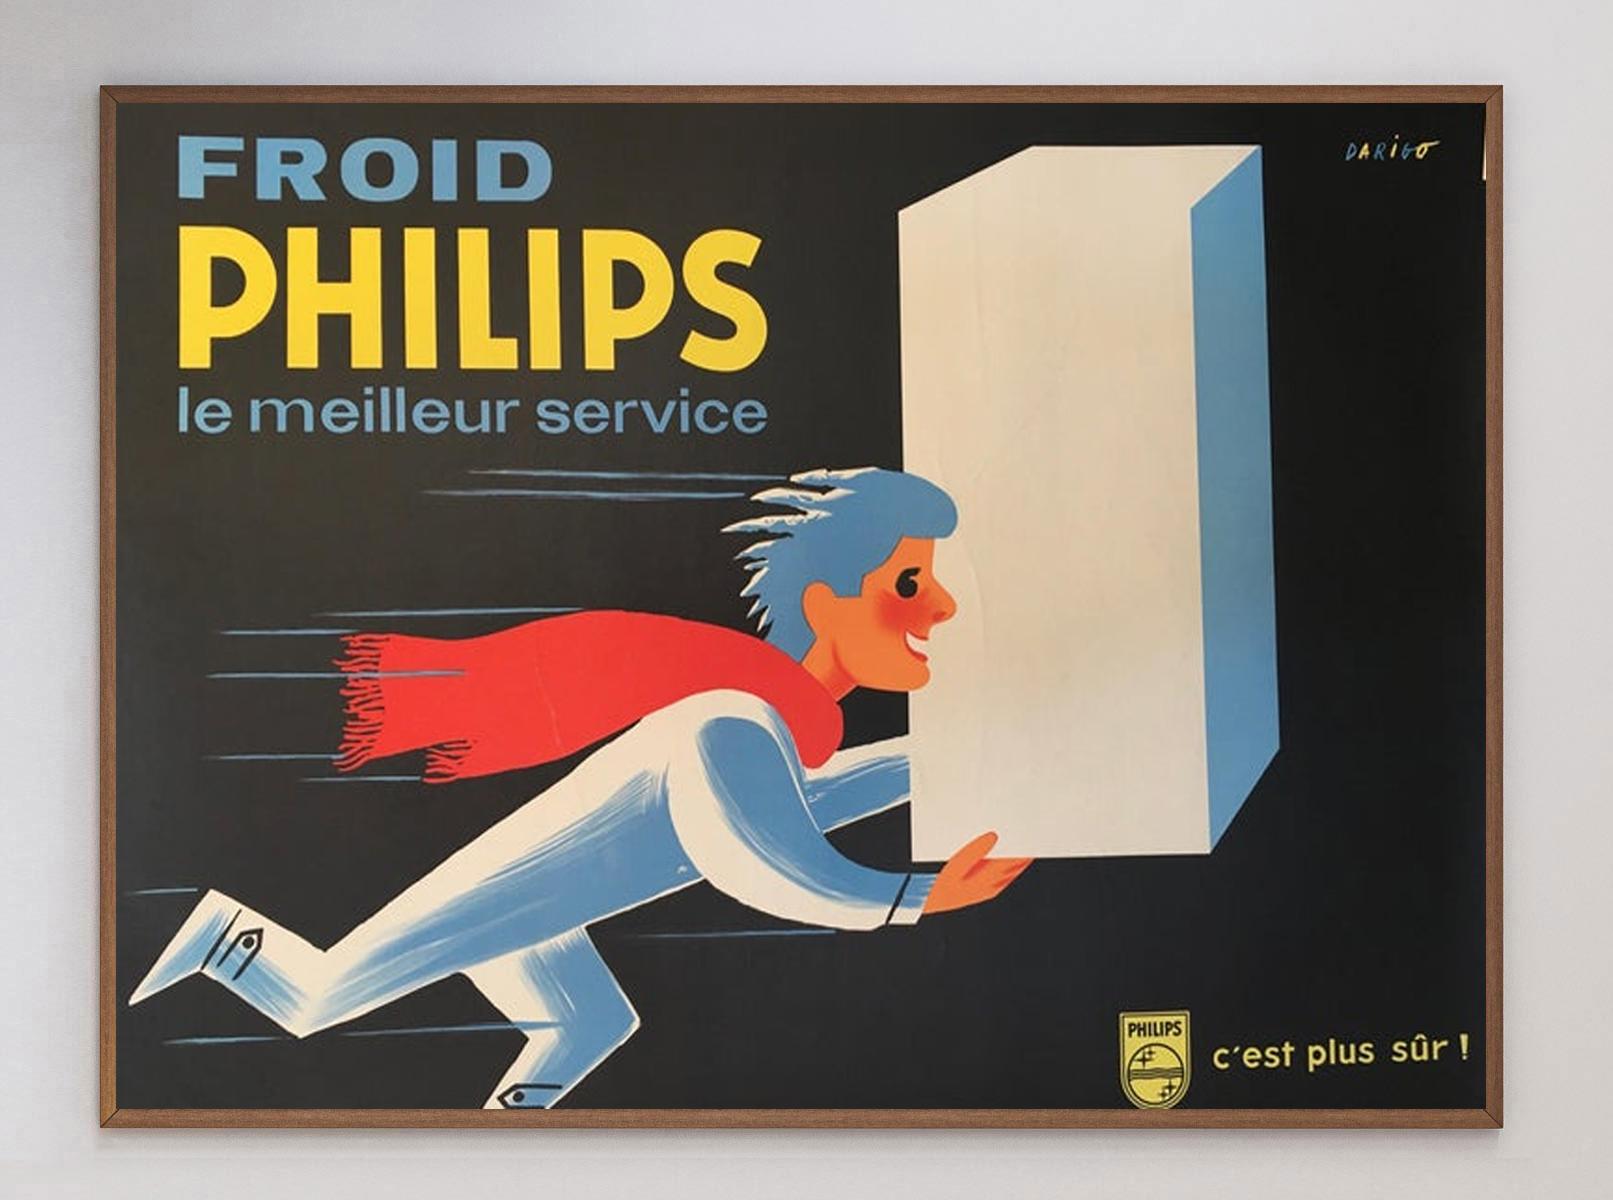 Wonderful & charming poster for Dutch electronics brand Philips. Founded in 1891, Philips was one of the biggest electronics brands in the UK and continues to trade today, focusing on health technology.

With artwork from Darigo, this beautiful